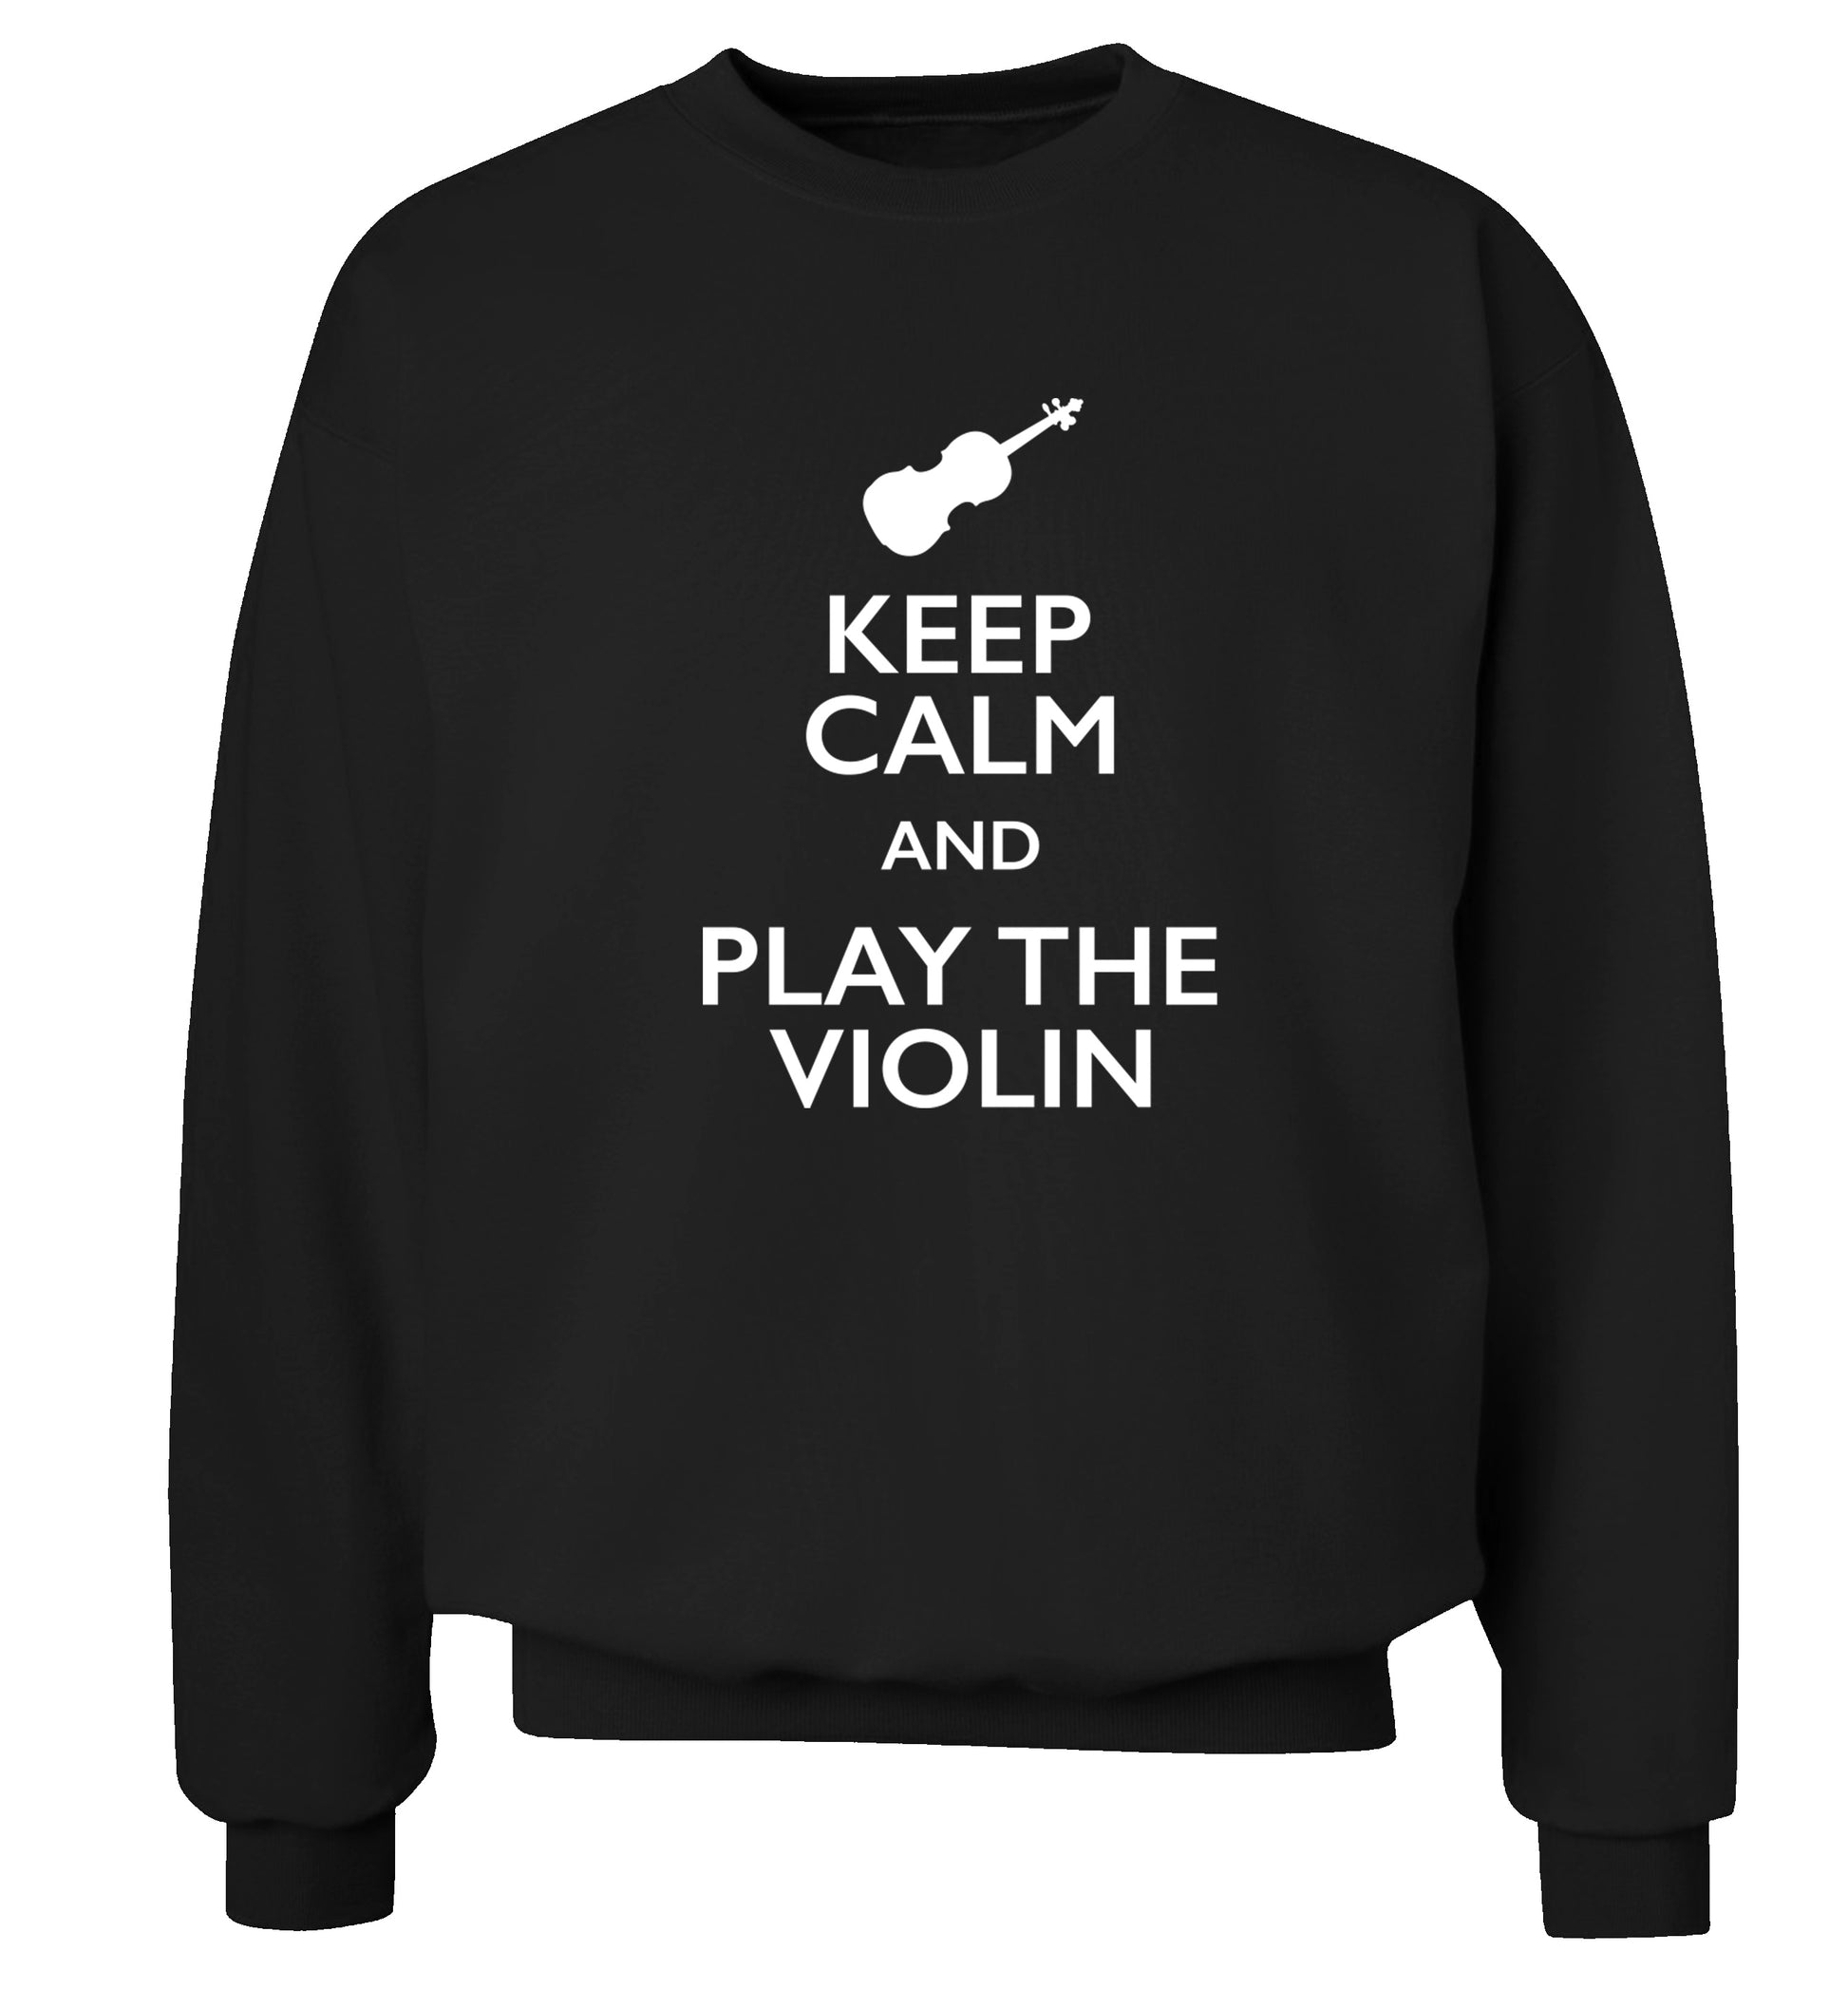 Keep calm and play the violin Adult's unisex black Sweater 2XL